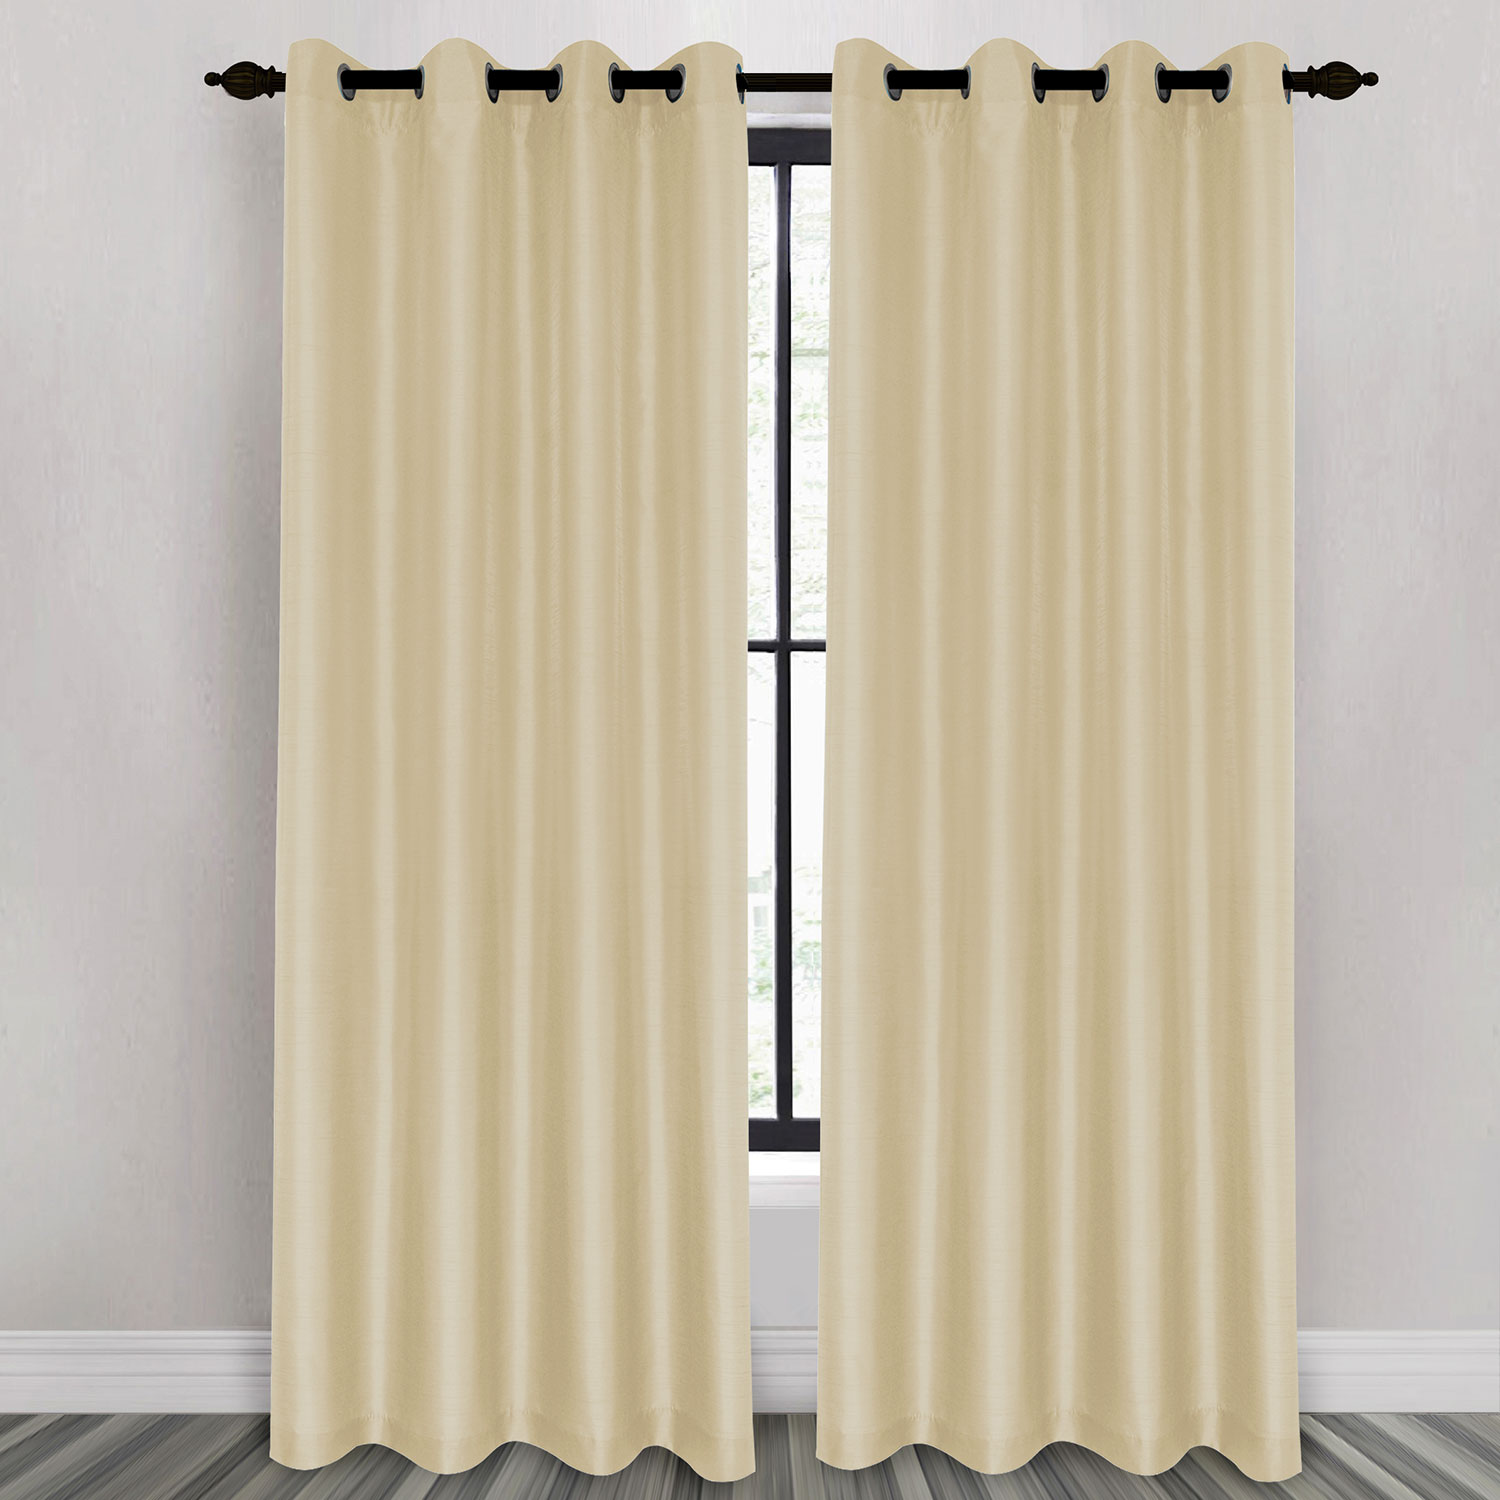 Faux silk panel with grommets, 54"x84" - Sand